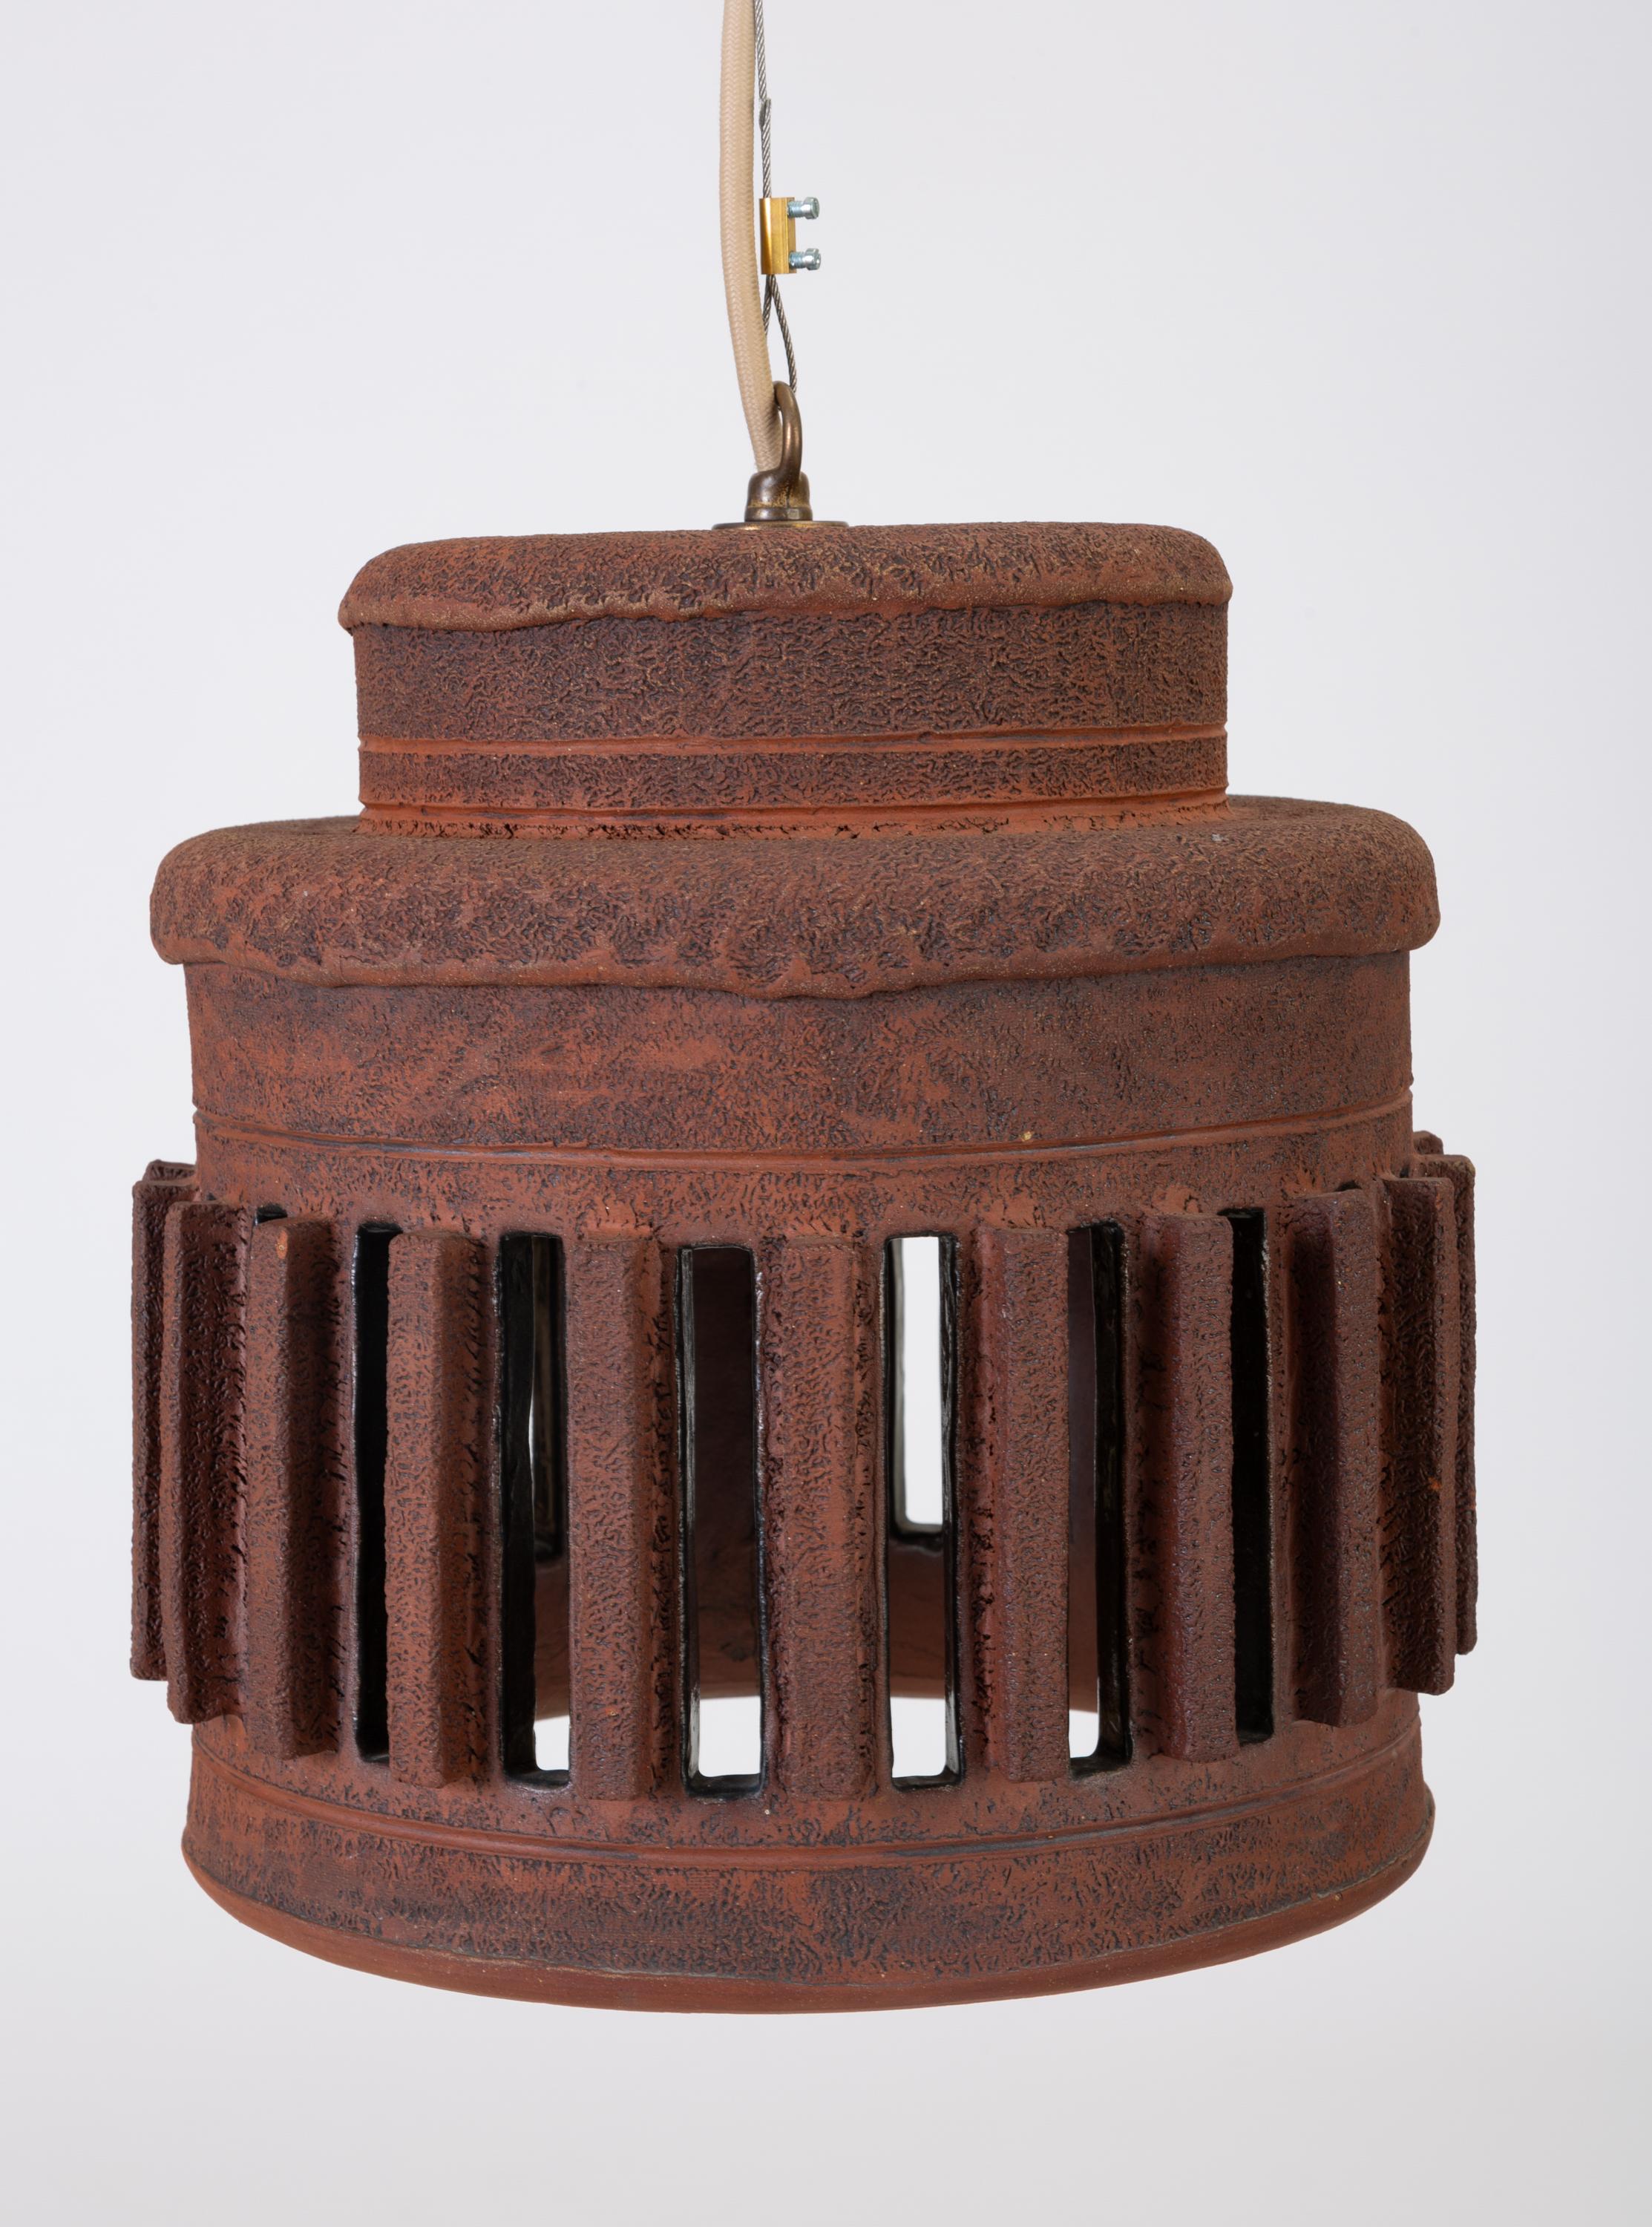 A unique stoneware pendant lamp with architectural, crenellated vents around the side. The lamp is made from a textured red-brown clay with handmade debossed and sgraffito detailing. This example has a rounded drum shape with raised vents. The light